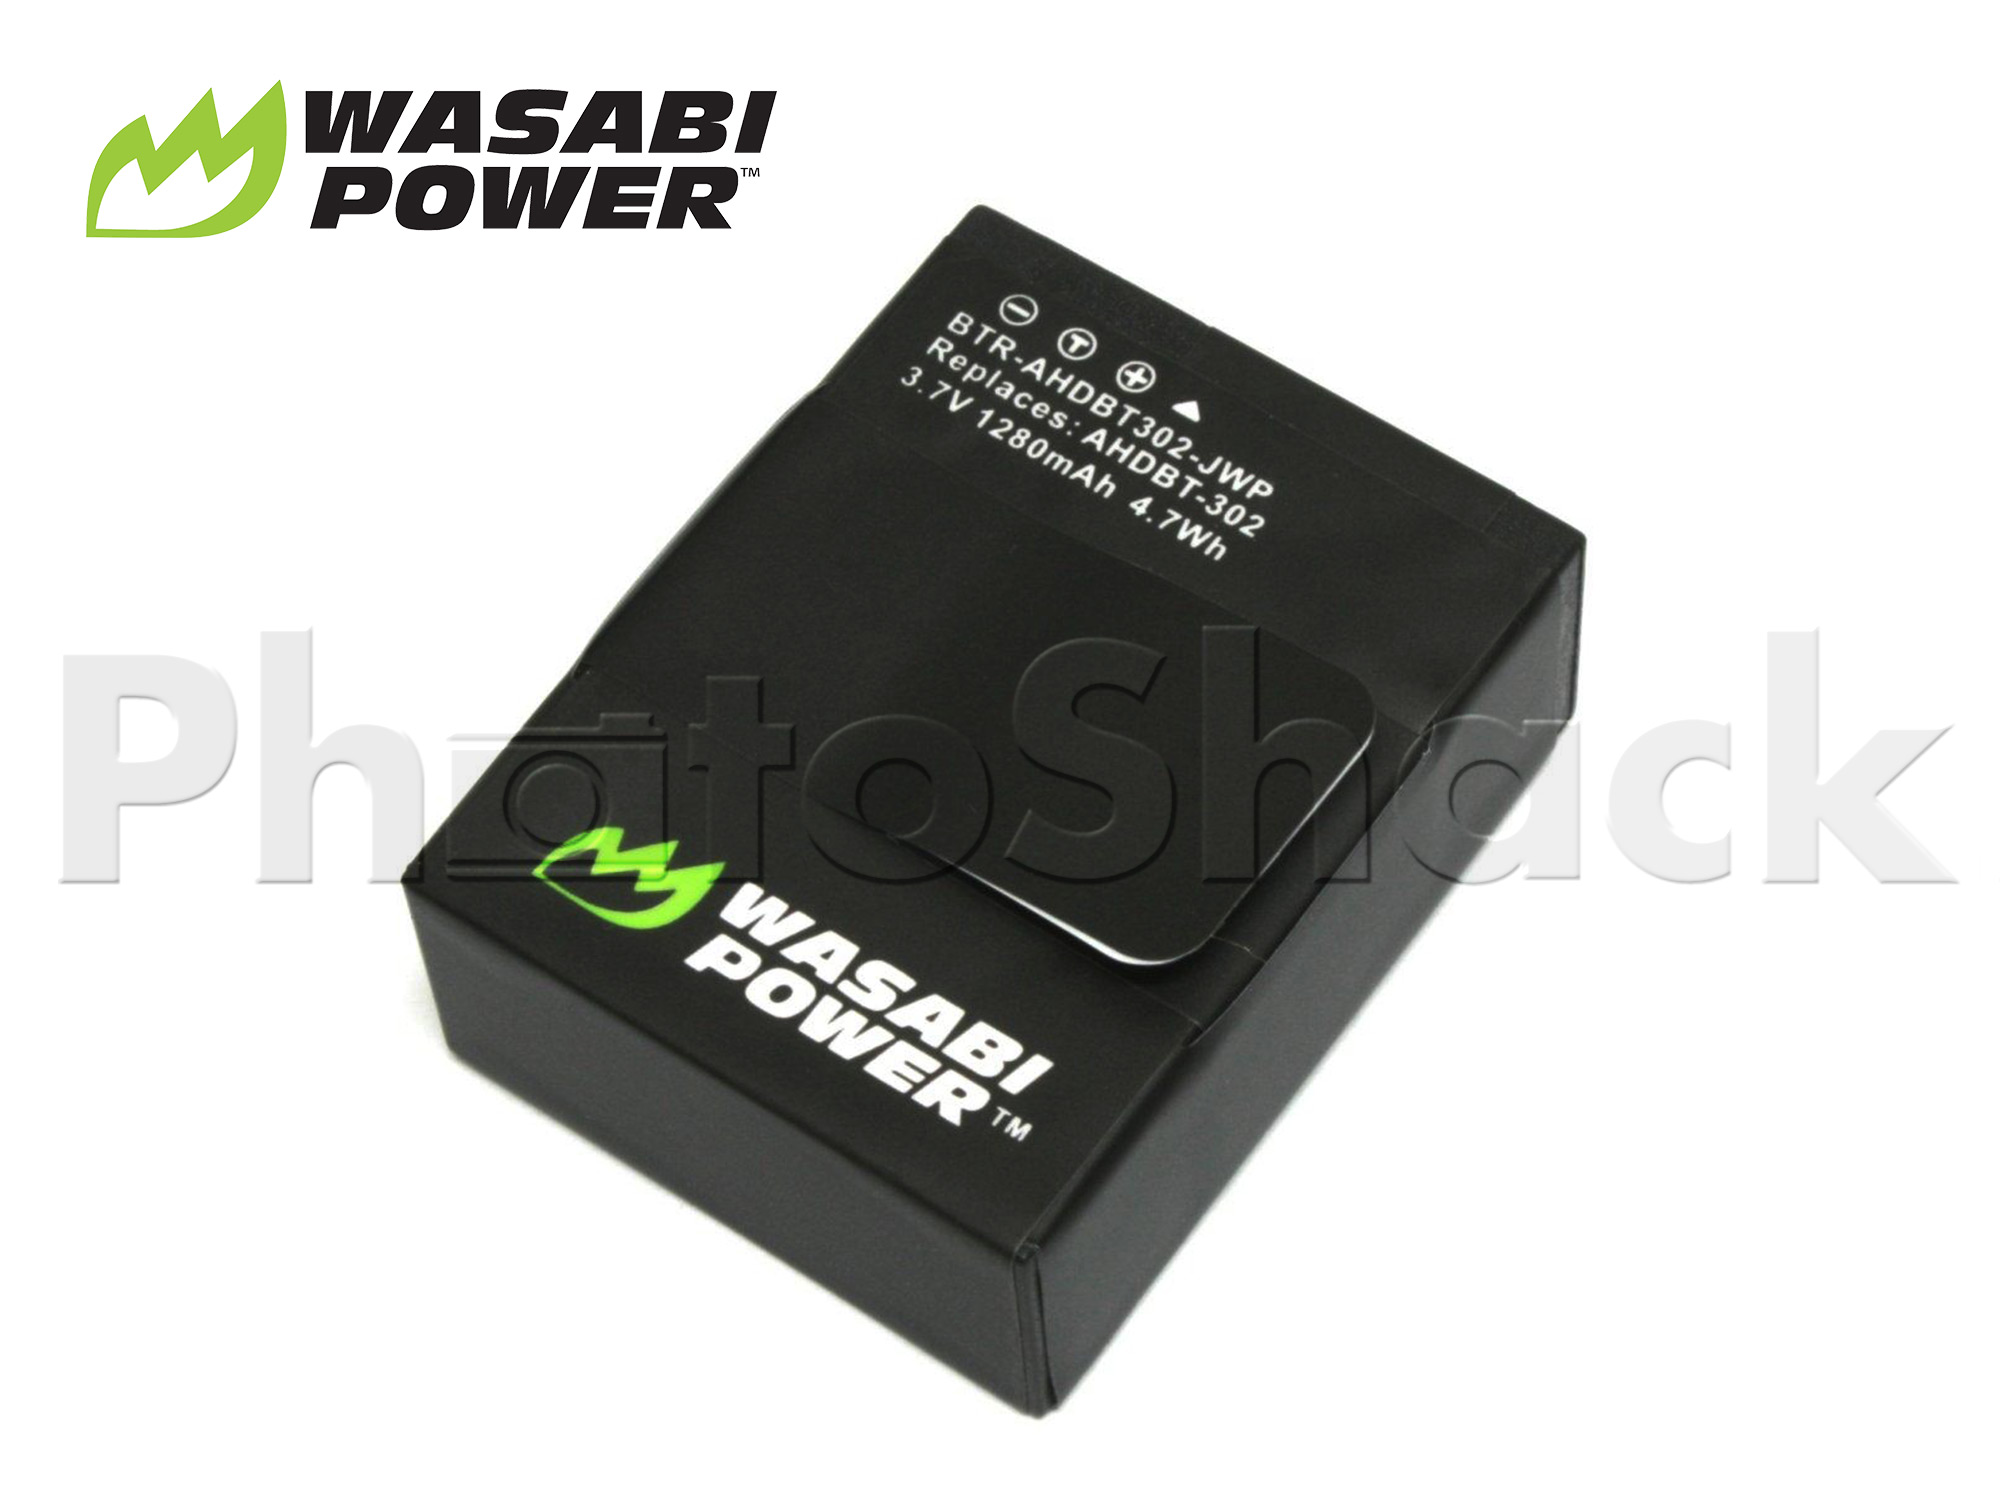 AHDBT-302 Battery for GoPro - Wasabi Power